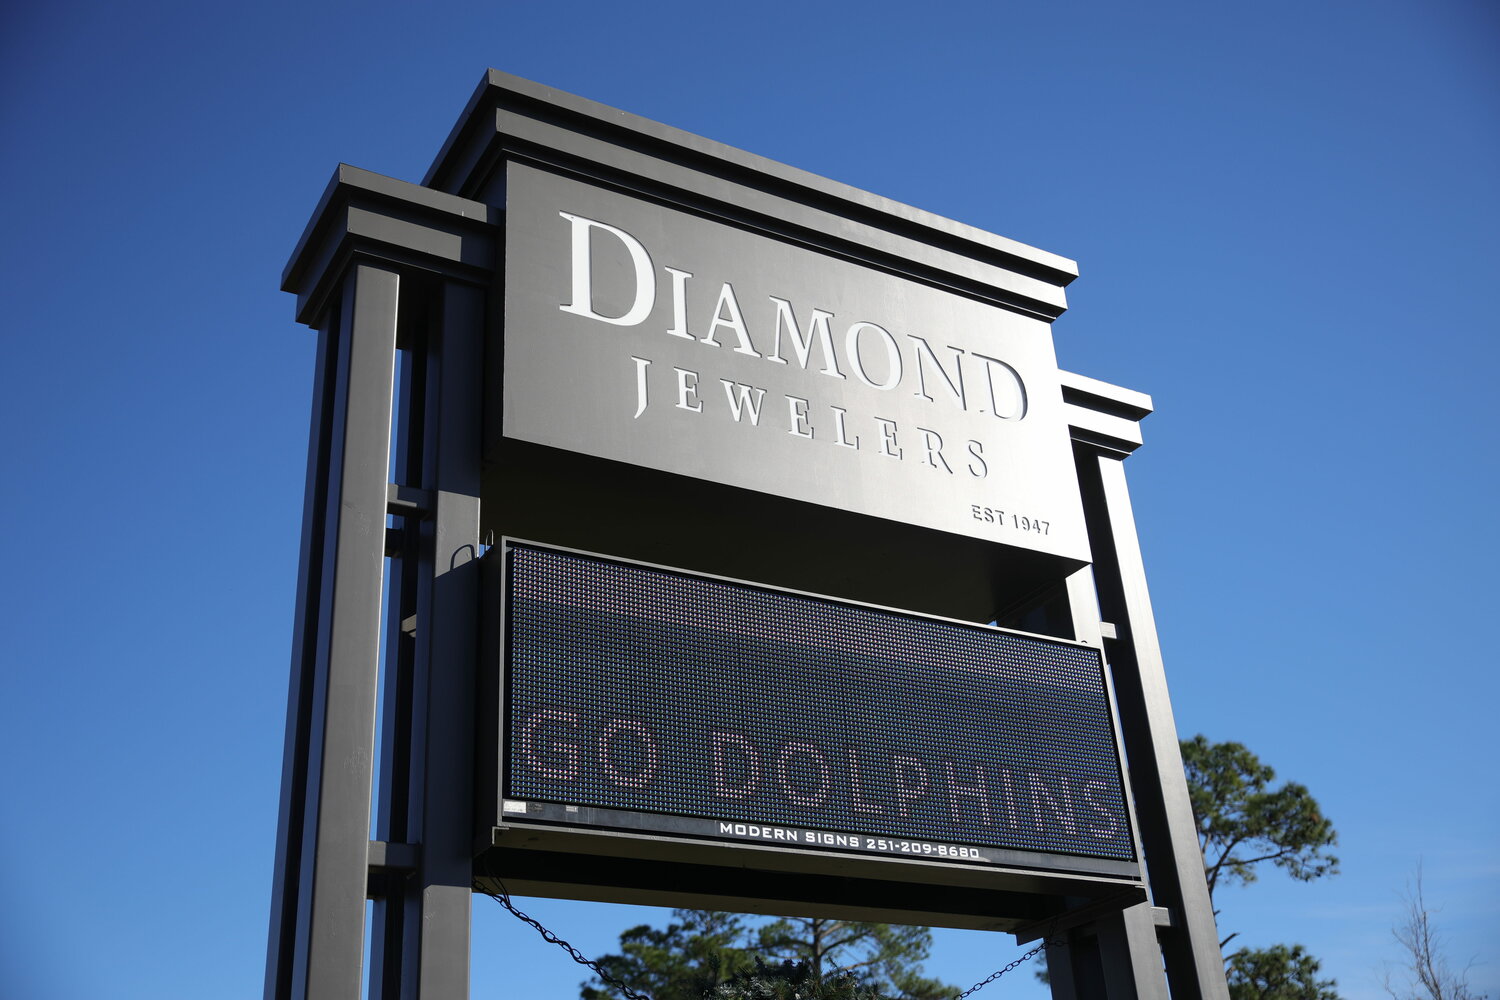 Diamond Jewelers showing their support for the GSHS football team by putting a graphic on their sign saying "Go Dolphins."